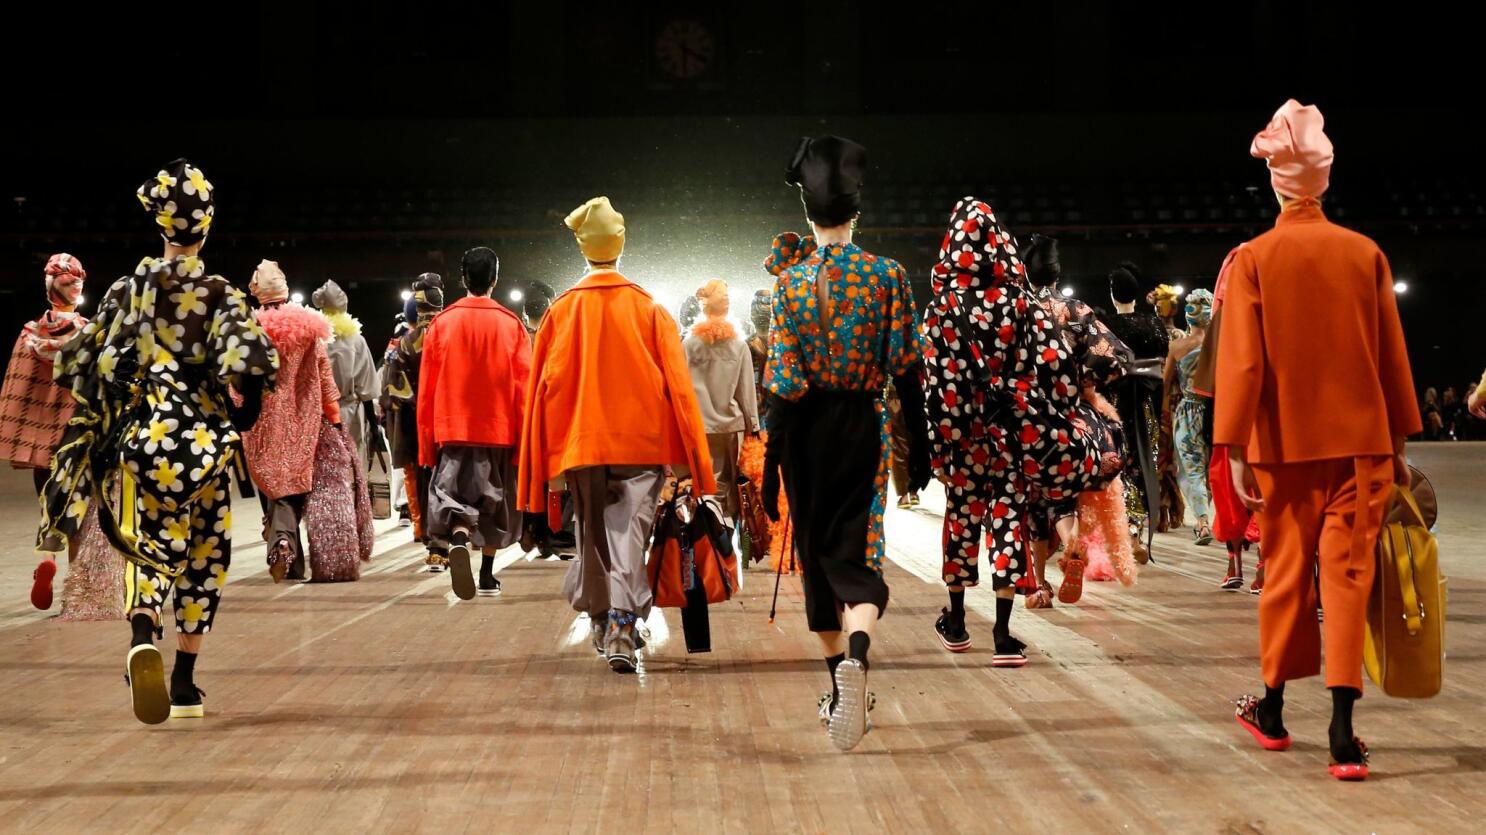 Marc Jacobs's pink fantasy world closes New York Fashion Week